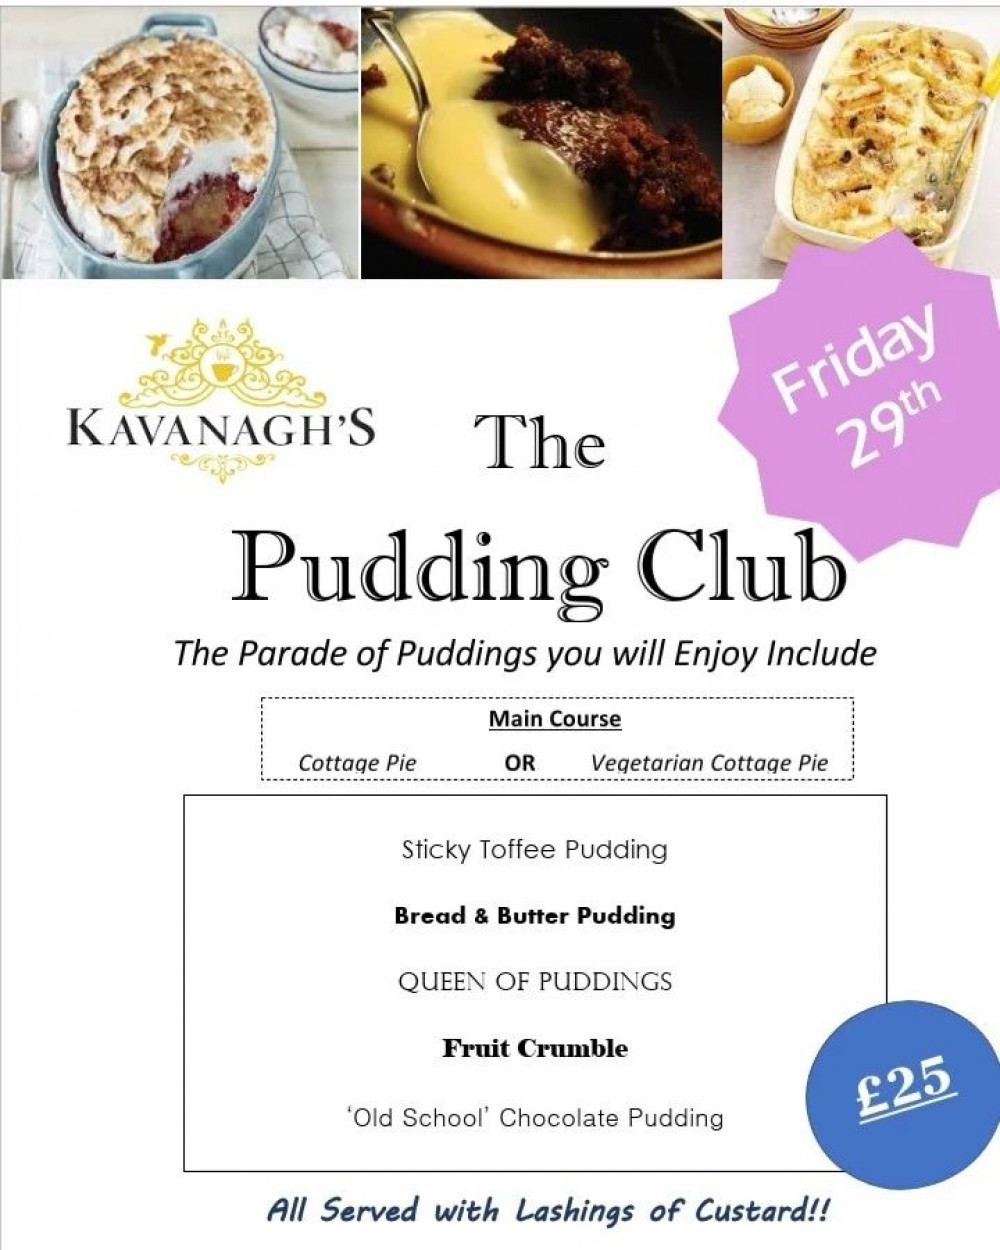 Kavanagh's Pudding Club poster (image courtesy of Kavanagh's Tea Rooms)